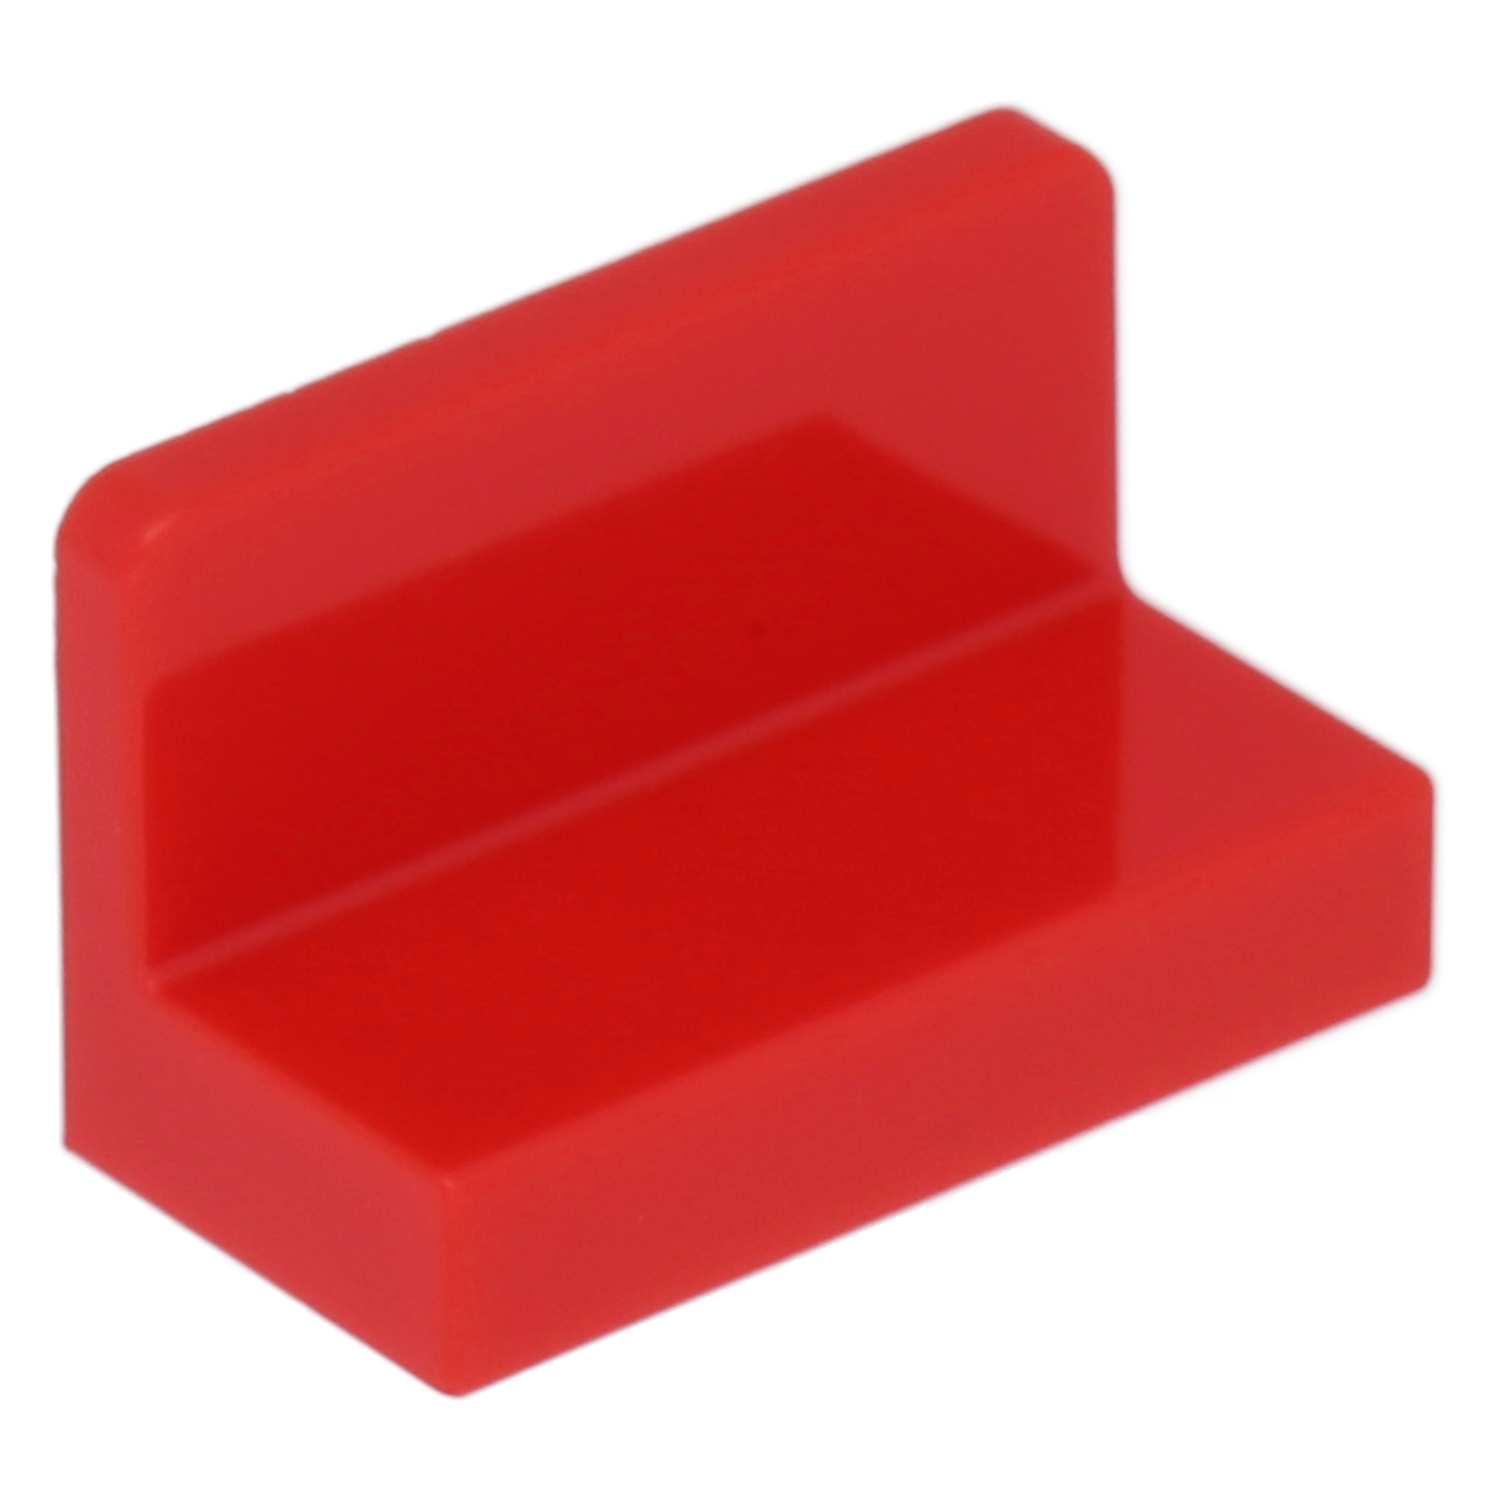 Lego plates (modified) - plate 1 x 2 x 1 with rounded corners